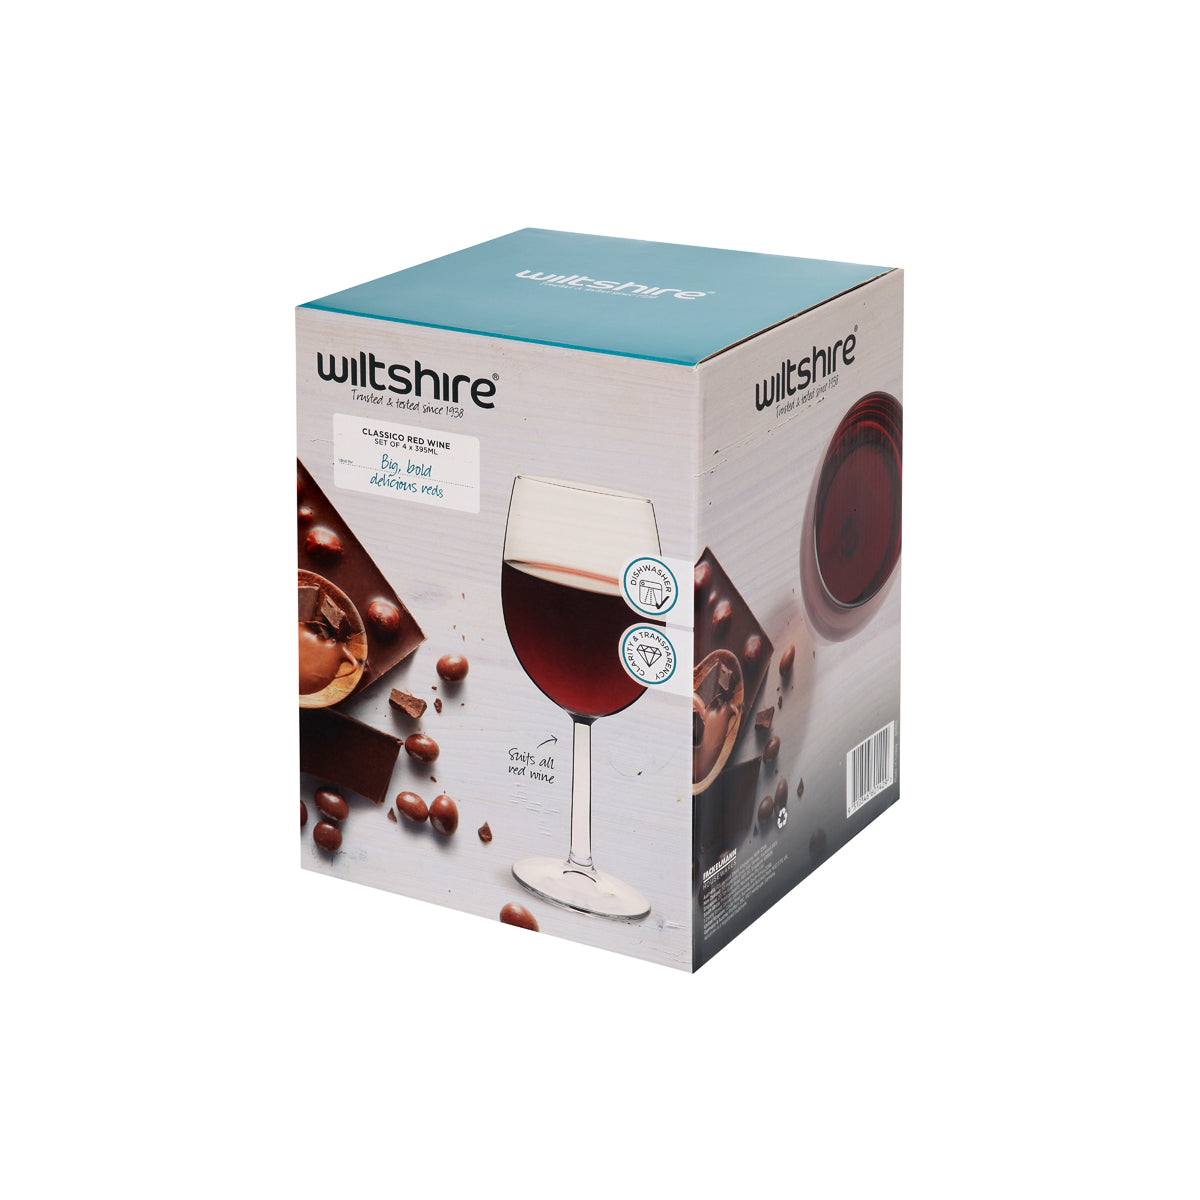 WLT60142 Wiltshire Classico Red Wine 395ml 4 Pack Tomkin Australia Hospitality Supplies